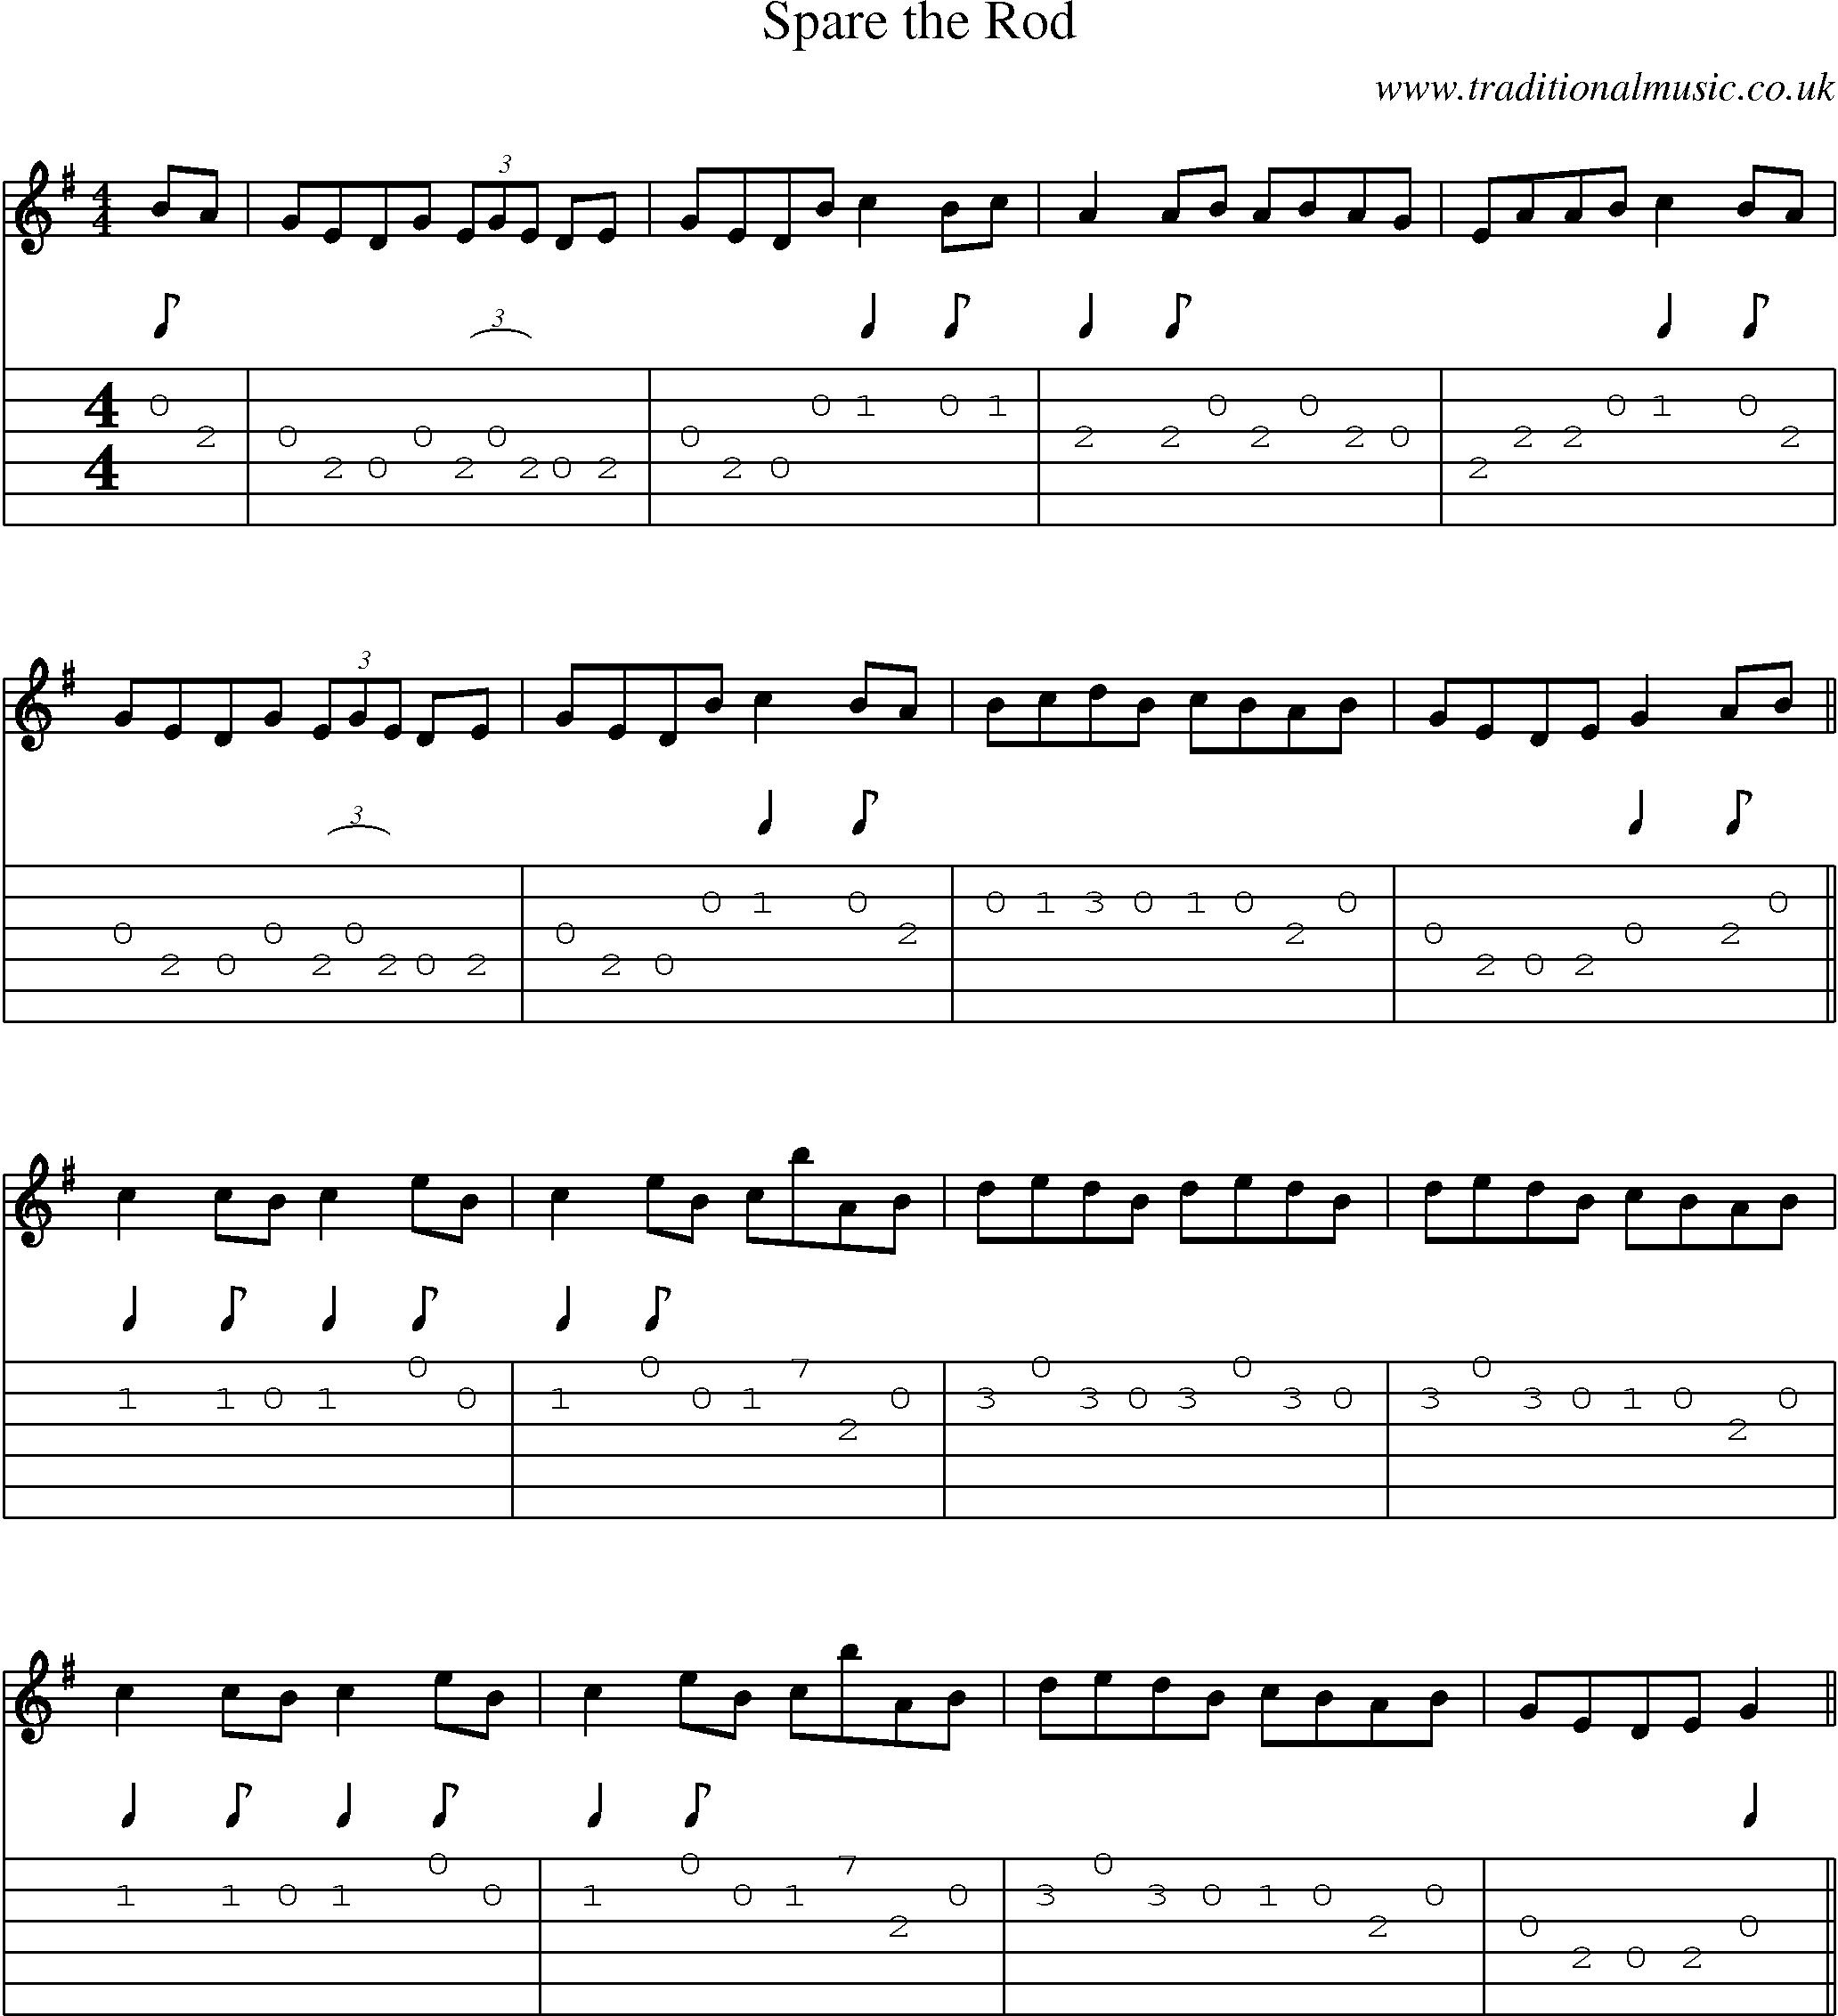 Music Score and Guitar Tabs for Spare Rod